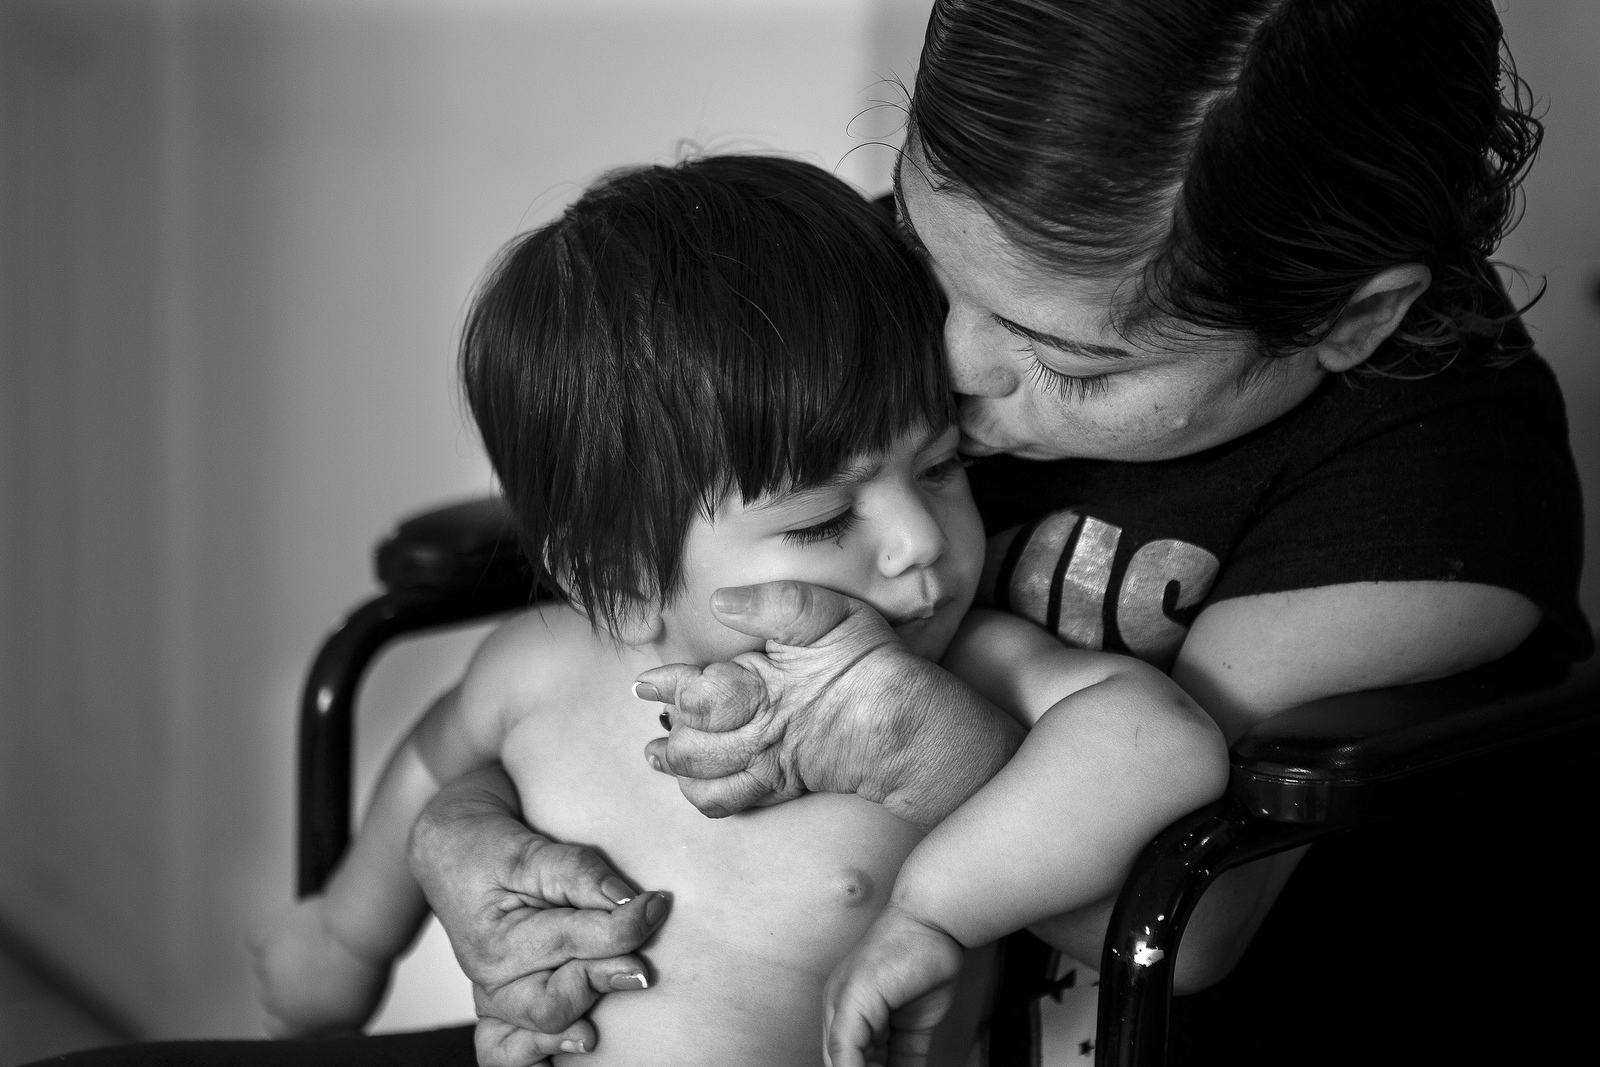  Rosa Caceres kisses her daughter Daniela Figueroa, 11 months, at their home in Lake Worth. Rosa has debilitating rheumatoid arthritis which forces her to use a wheelchair. Sometimes the pain in her joints is so bad that Rosa cannot even feed herself